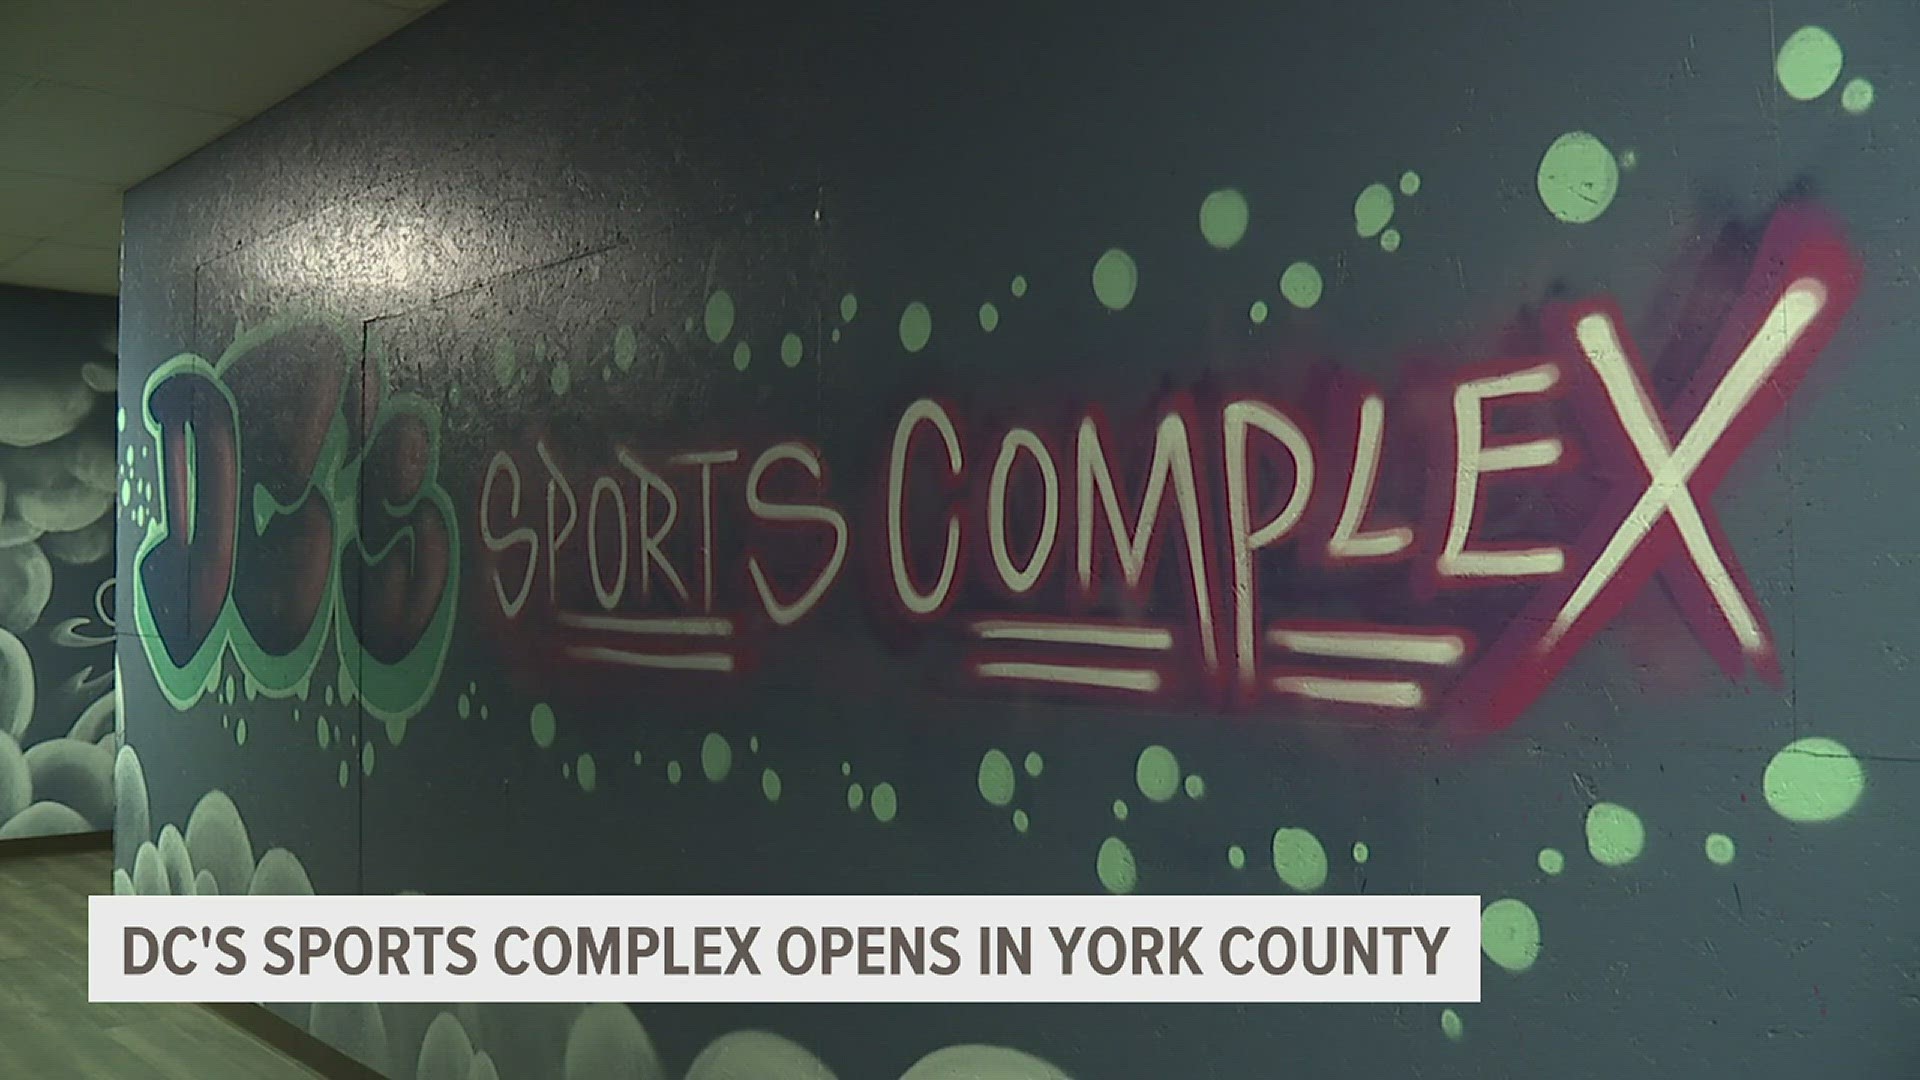 The sports complex opened Sept. 9, and provides options for people to practice baseball, golf, and arcade gaming.